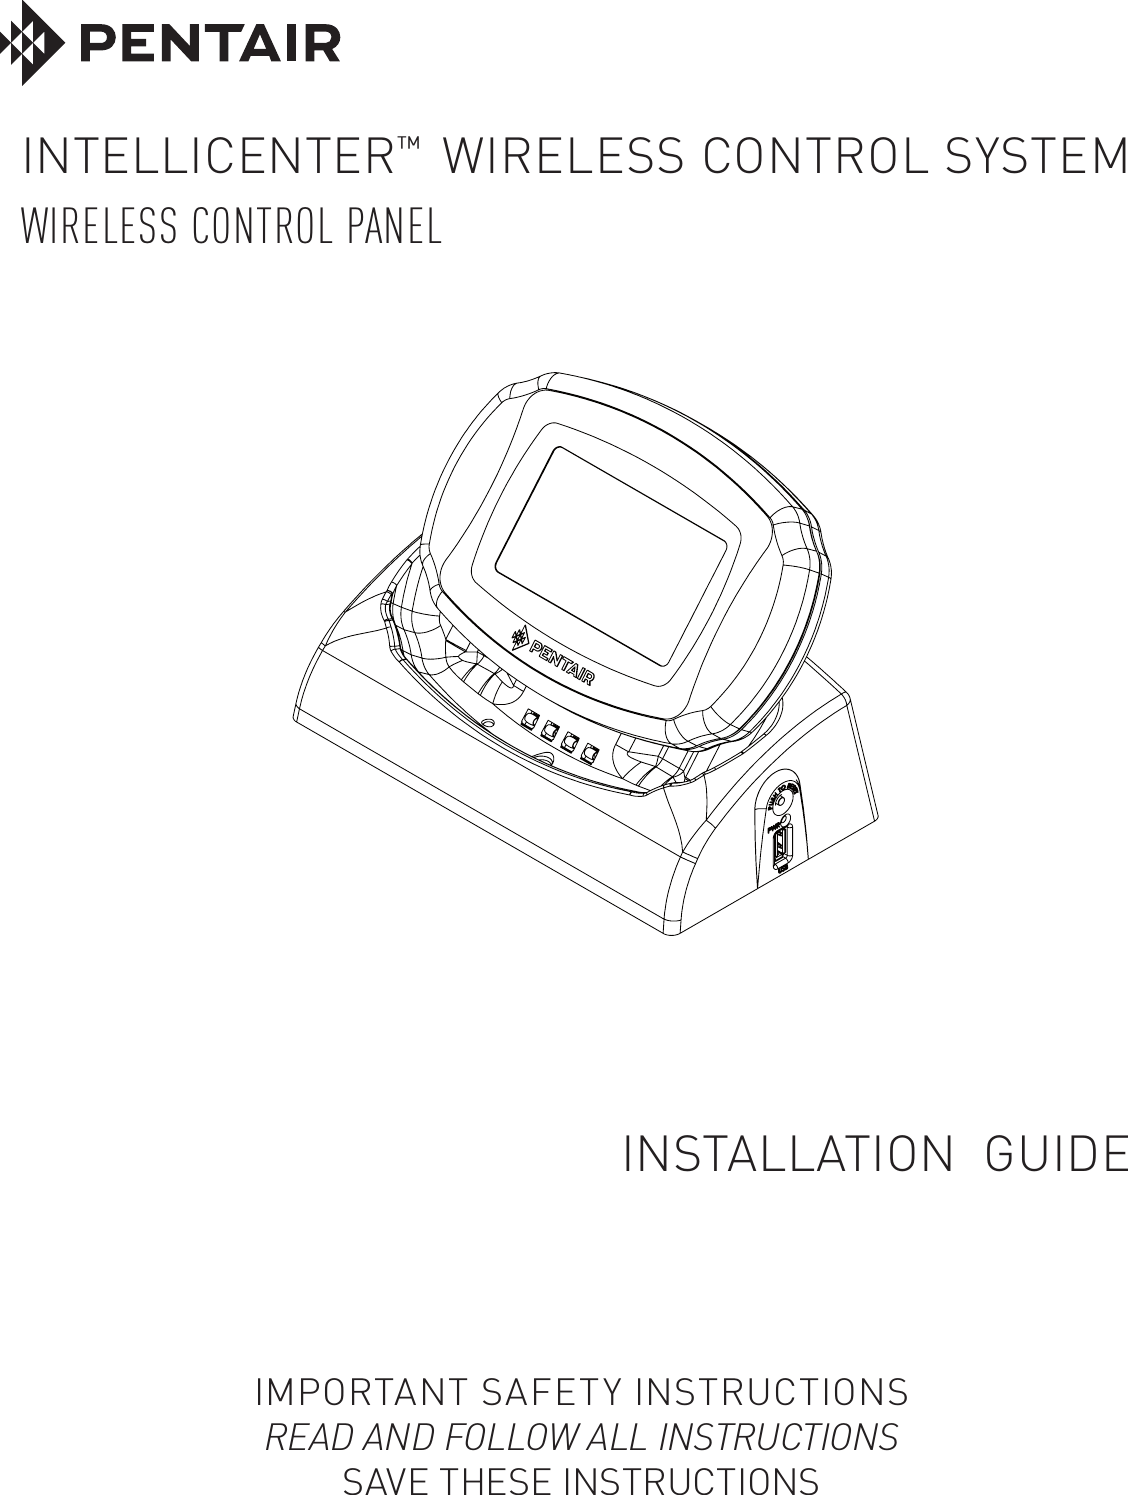 IMPORTANT SAFETY INSTRUCTIONSREAD AND FOLLOW ALL INSTRUCTIONSSAVE THESE INSTRUCTIONSINTELLICENTER™  WIRELESS CONTROL SYSTEMWIRELESS CONTROL PANEL INSTALLATION  GUIDE